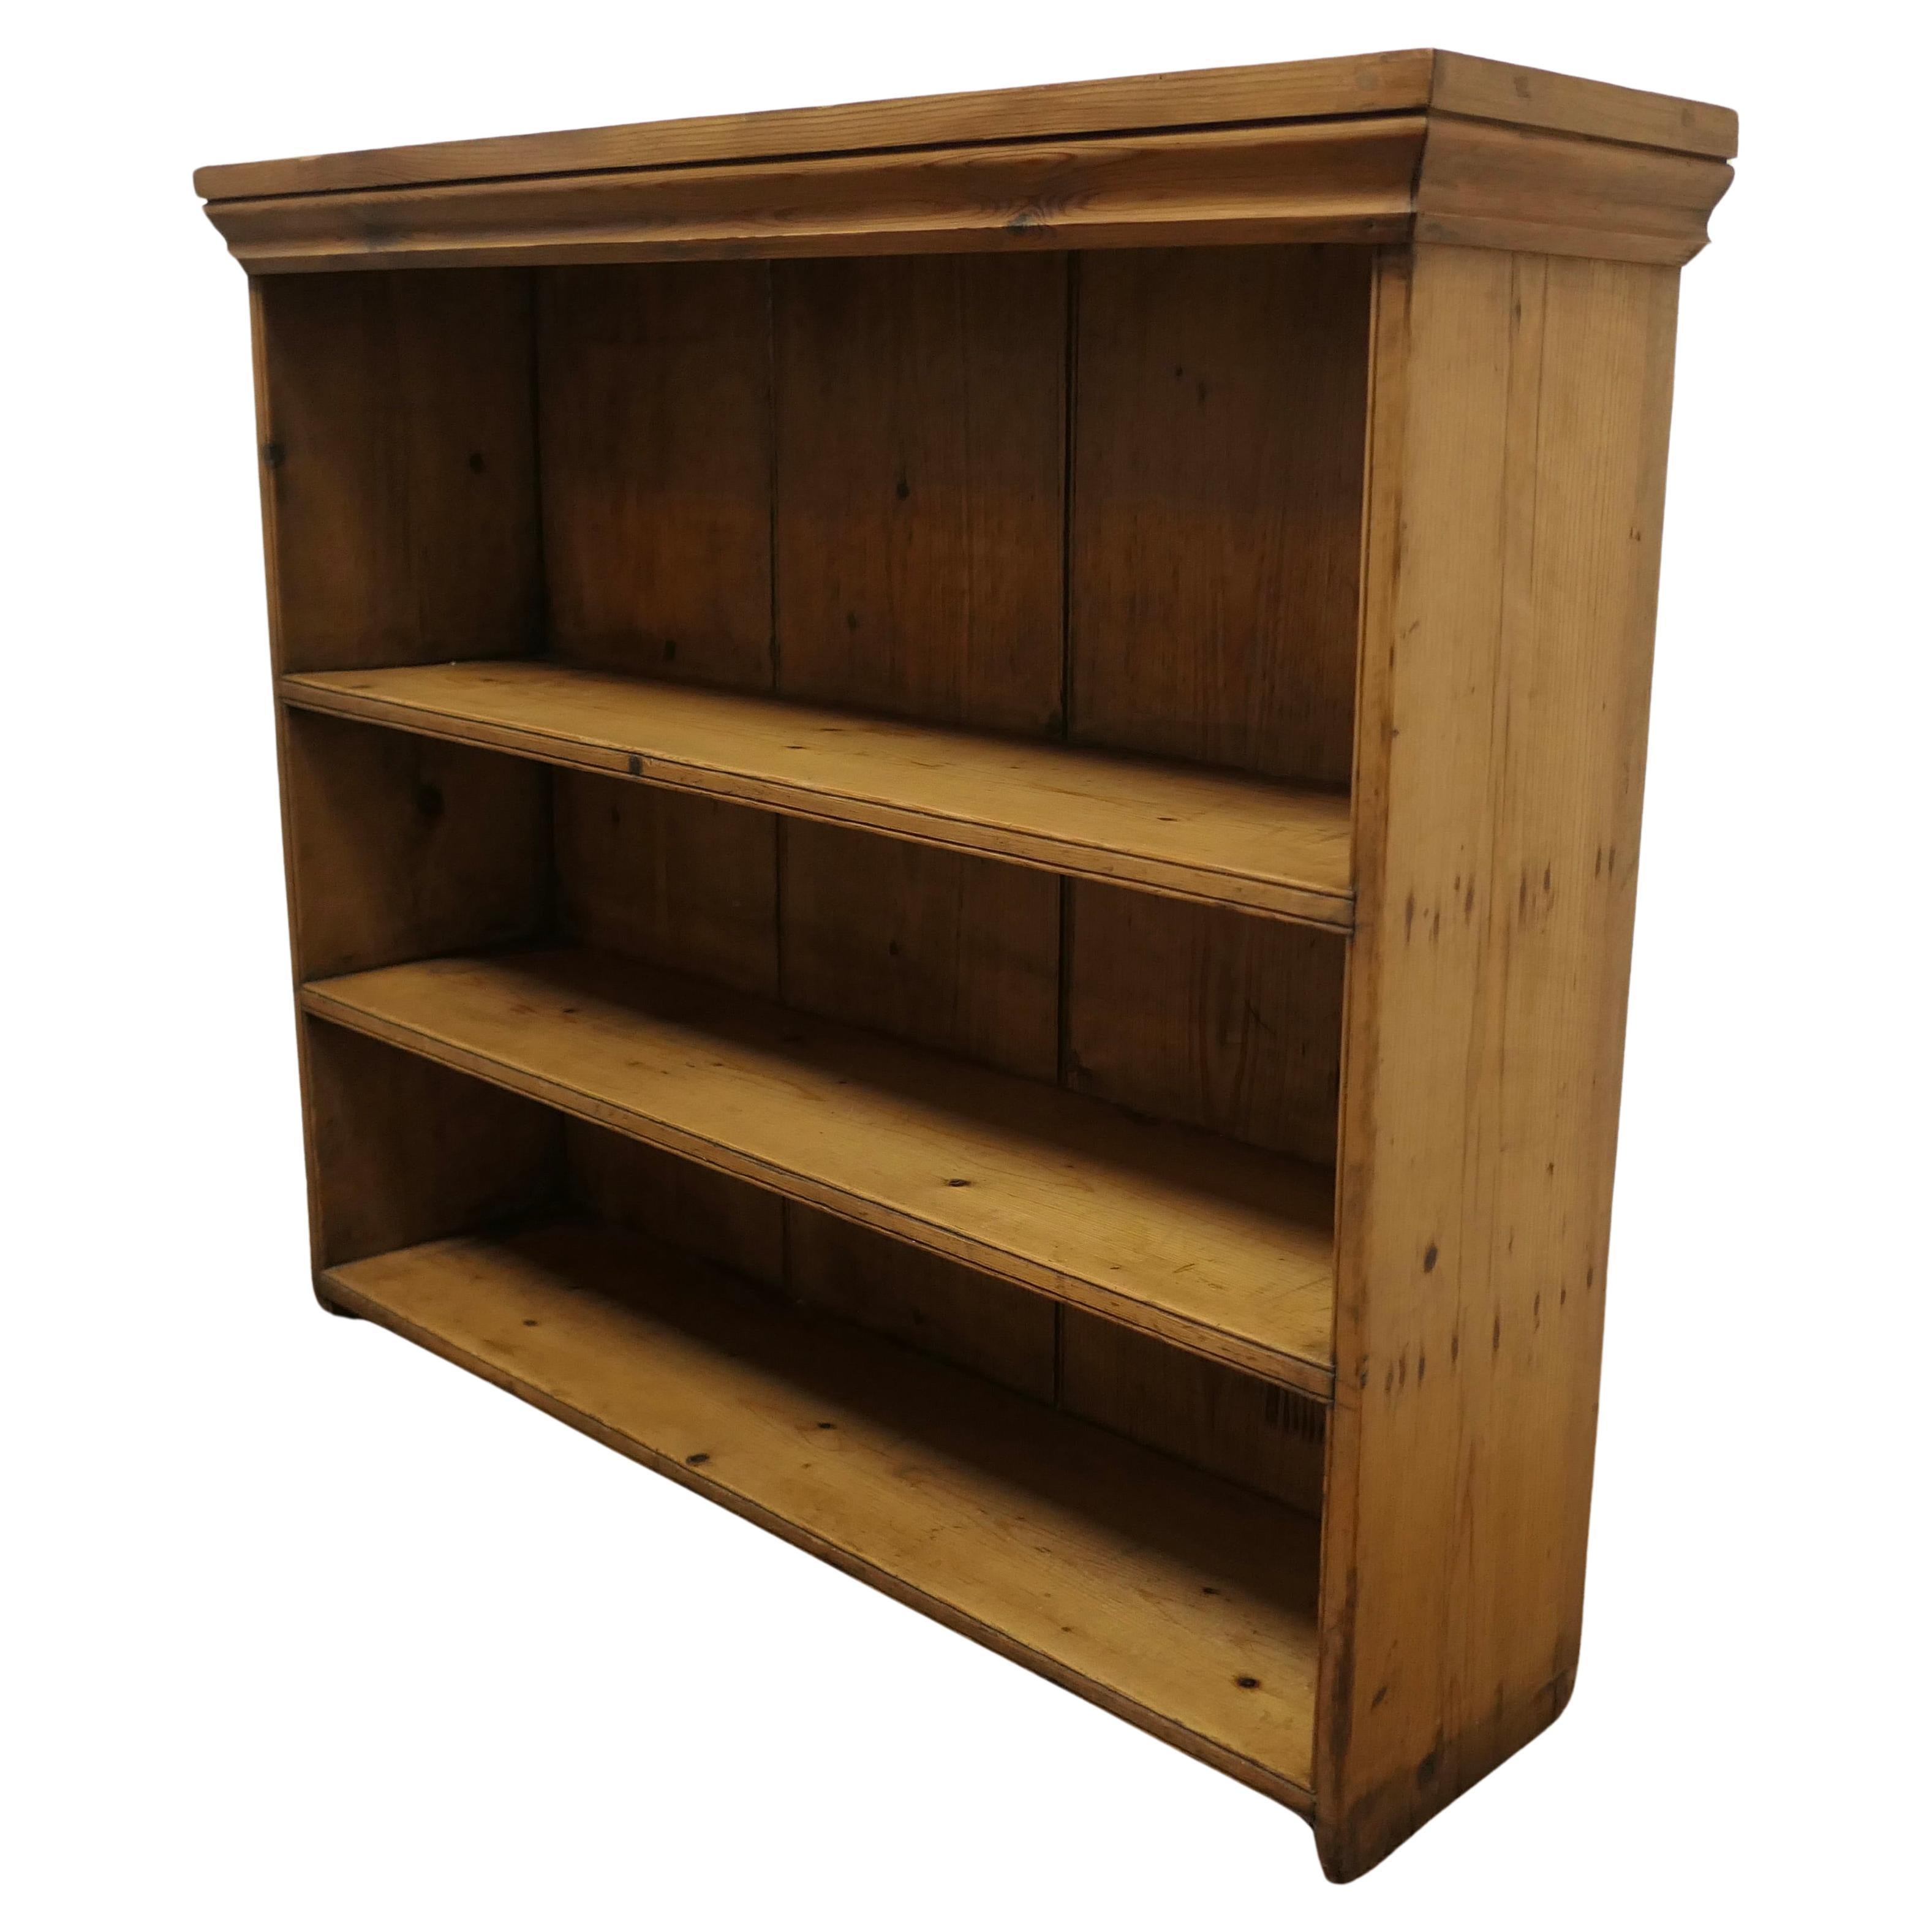 Victorian Pine Open Book Case, Wall Shelves  This is an excellent quality piece For Sale